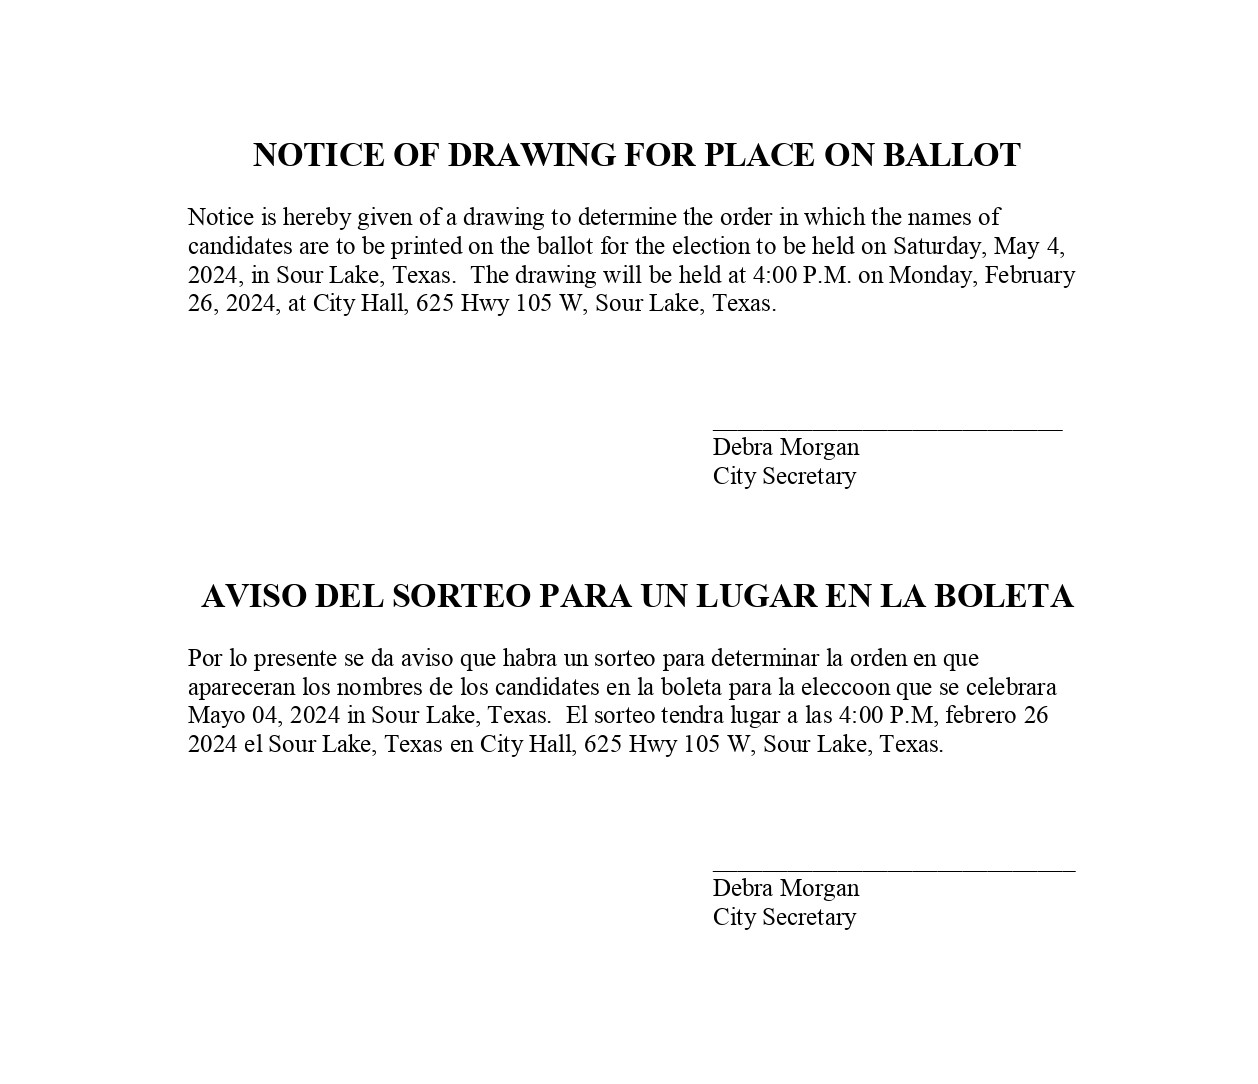 NOTICE OF DRAWING FOR PLACE ON BALLOT 2024